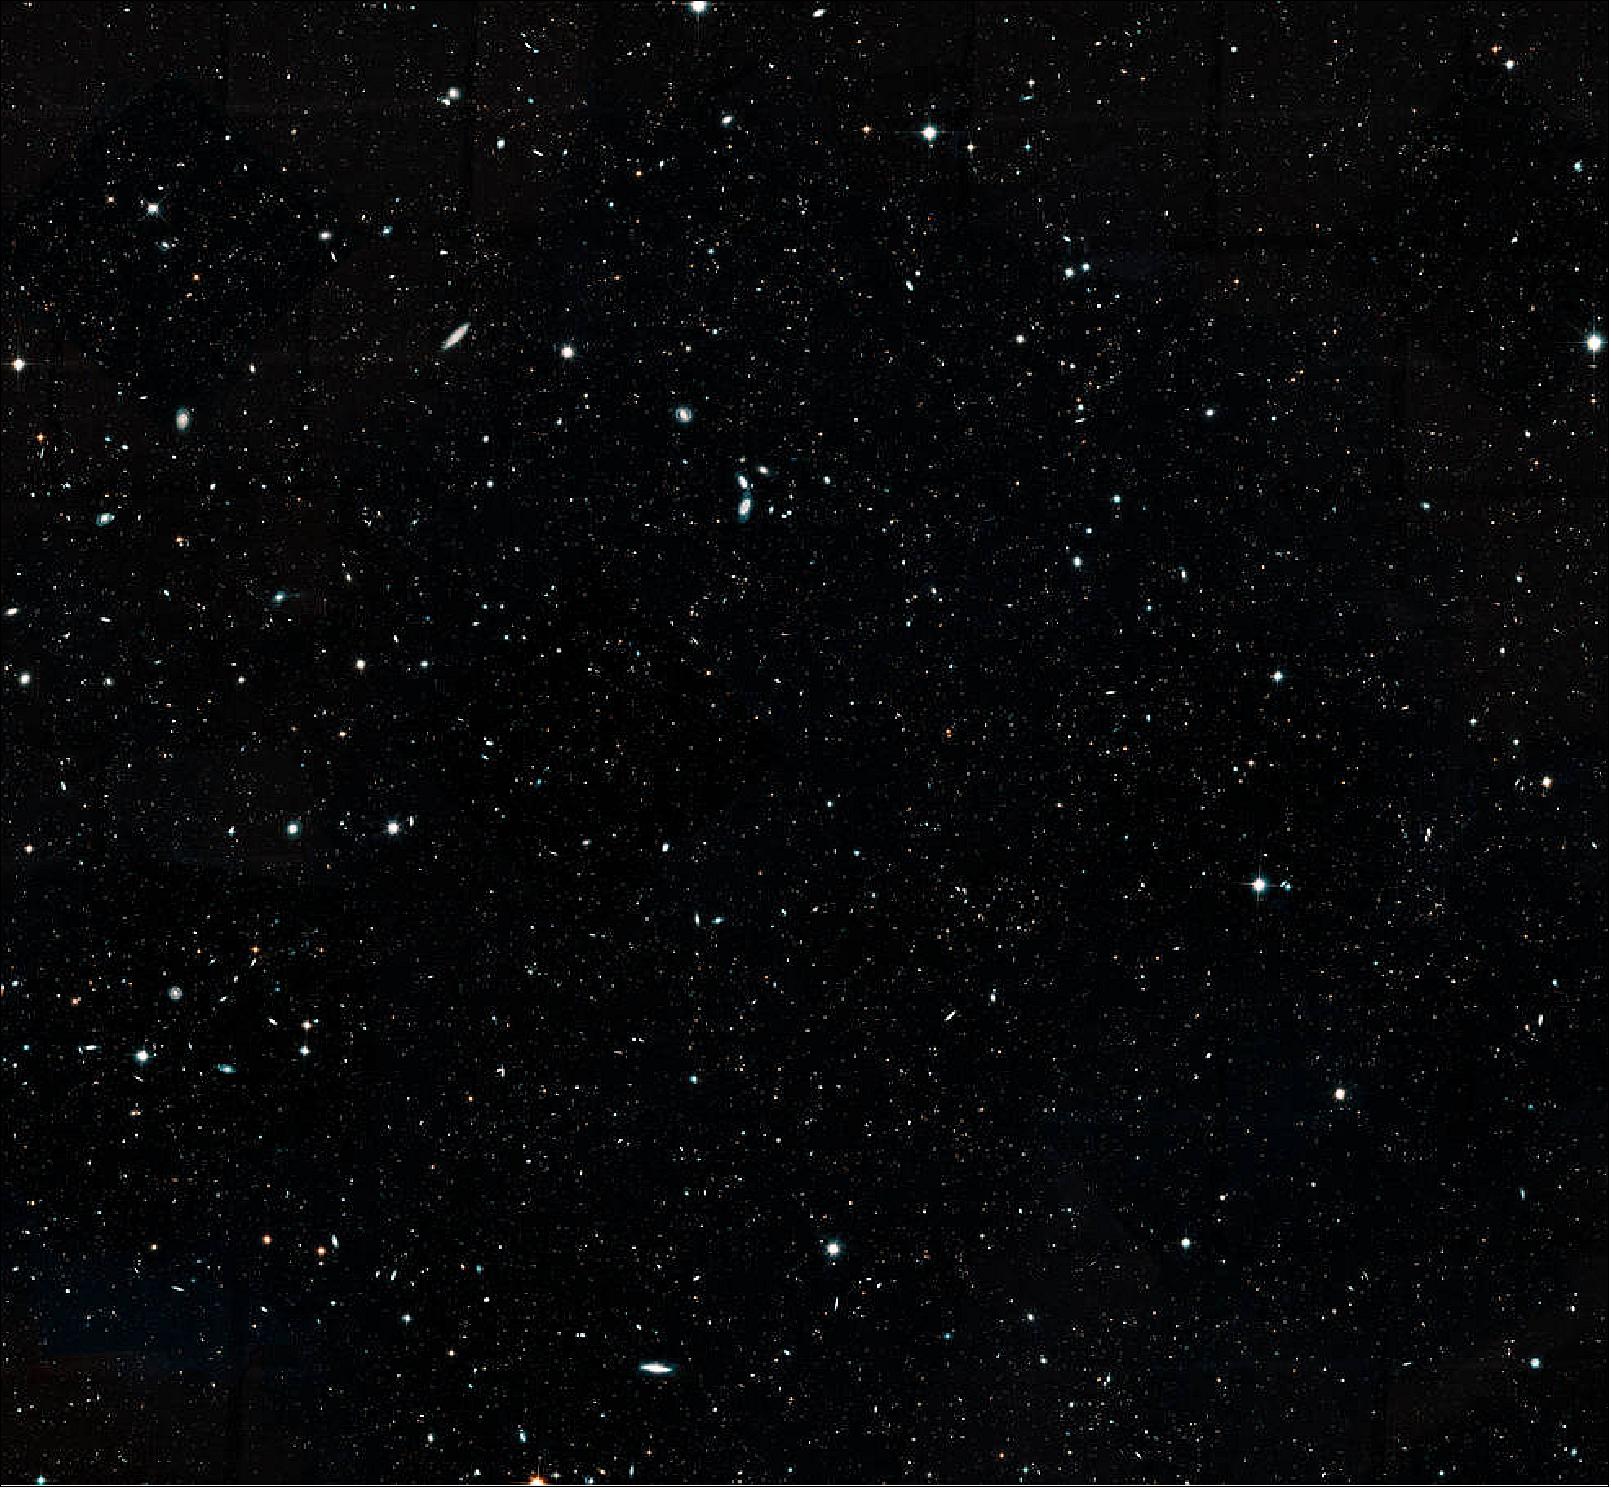 Figure 51: This Hubble Space Telescope image represents a portion of the Hubble Legacy Field, one of the widest views of the universe ever made. The image, a combination of thousands of snapshots, represents 16 years' worth of observations. The Hubble Legacy Field includes observations taken by several Hubble deep-field surveys, including the eXtreme Deep Field (XDF), the deepest view of the universe. The wavelength range stretches from ultraviolet to near-infrared light, capturing all the features of galaxy assembly over time. This cropped image mosaic presents a wide portrait of the distant universe and contains roughly 200,000 galaxies. They stretch back through 13.3 billion years of time to just 500 million years after the universe's birth in the big bang (image credit: NASA, ESA, G. Illingworth and D. Magee (University of California, Santa Cruz), K. Whitaker (University of Connecticut), R. Bouwens (Leiden University), P. Oesch (University of Geneva) and the Hubble Legacy Field team)